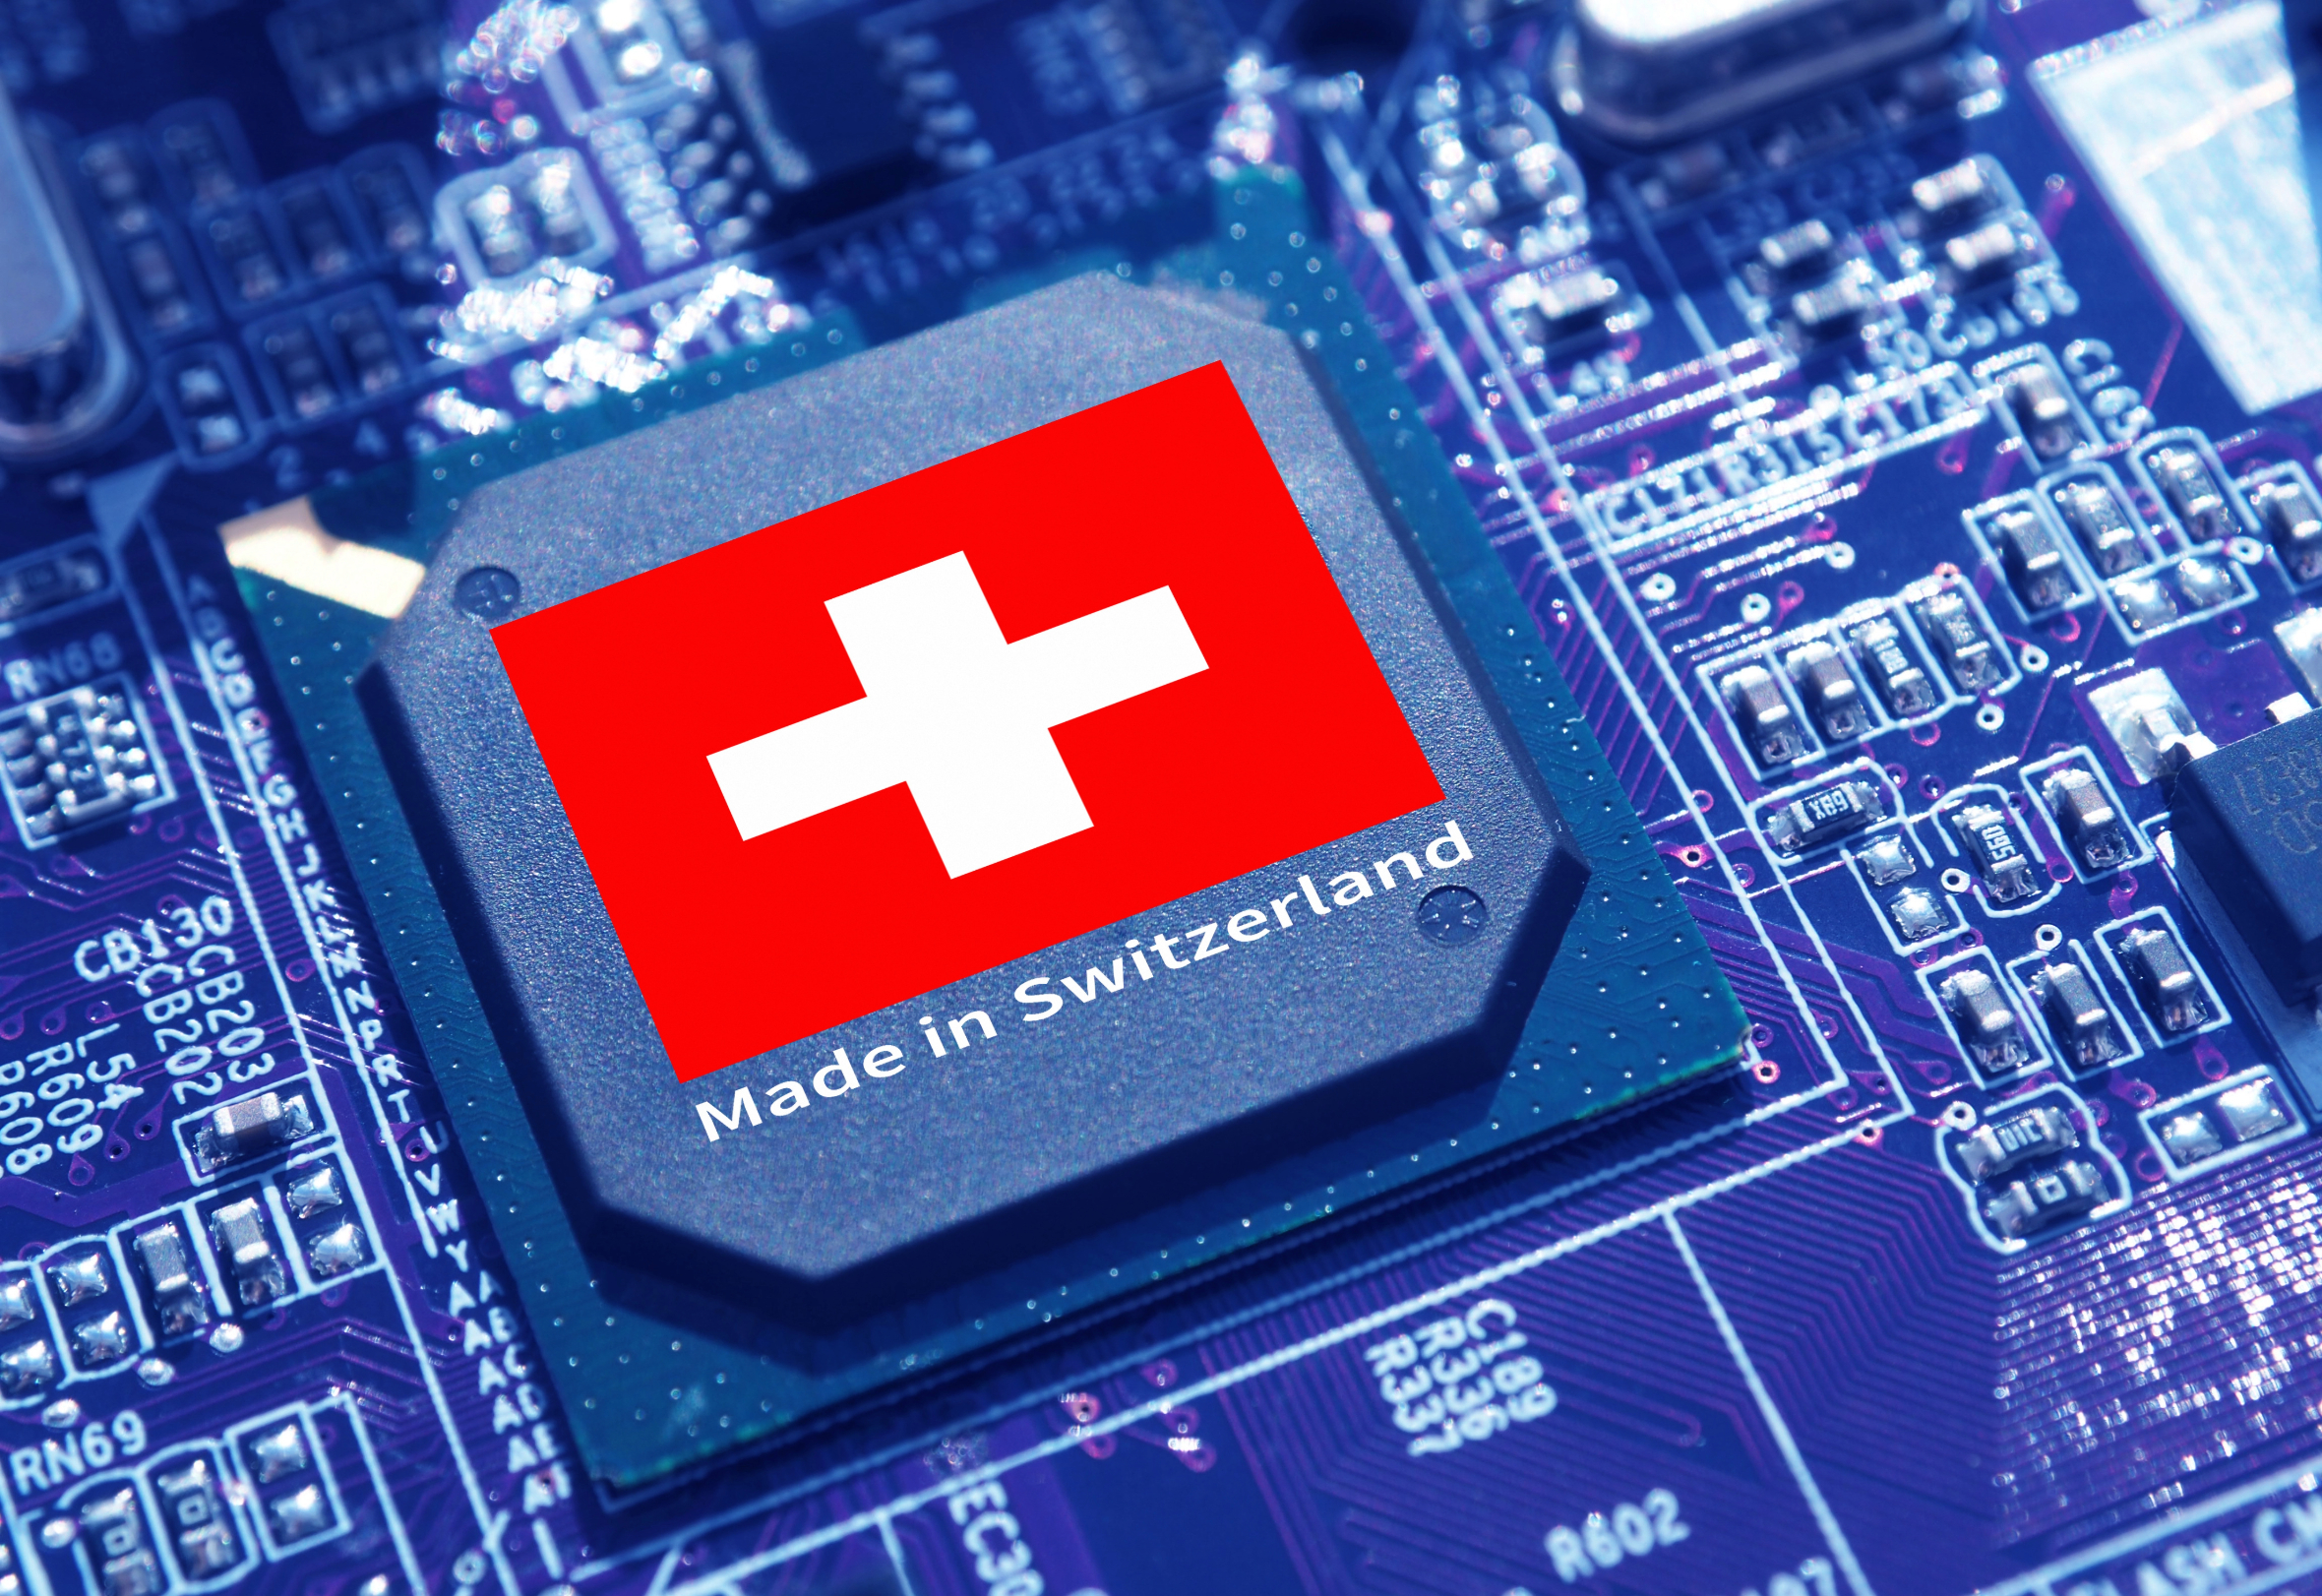 This strategic program aims to fortify Swiss research and innovation in semiconductor technologies, microelectronics, and integrated circuit (IC) design.